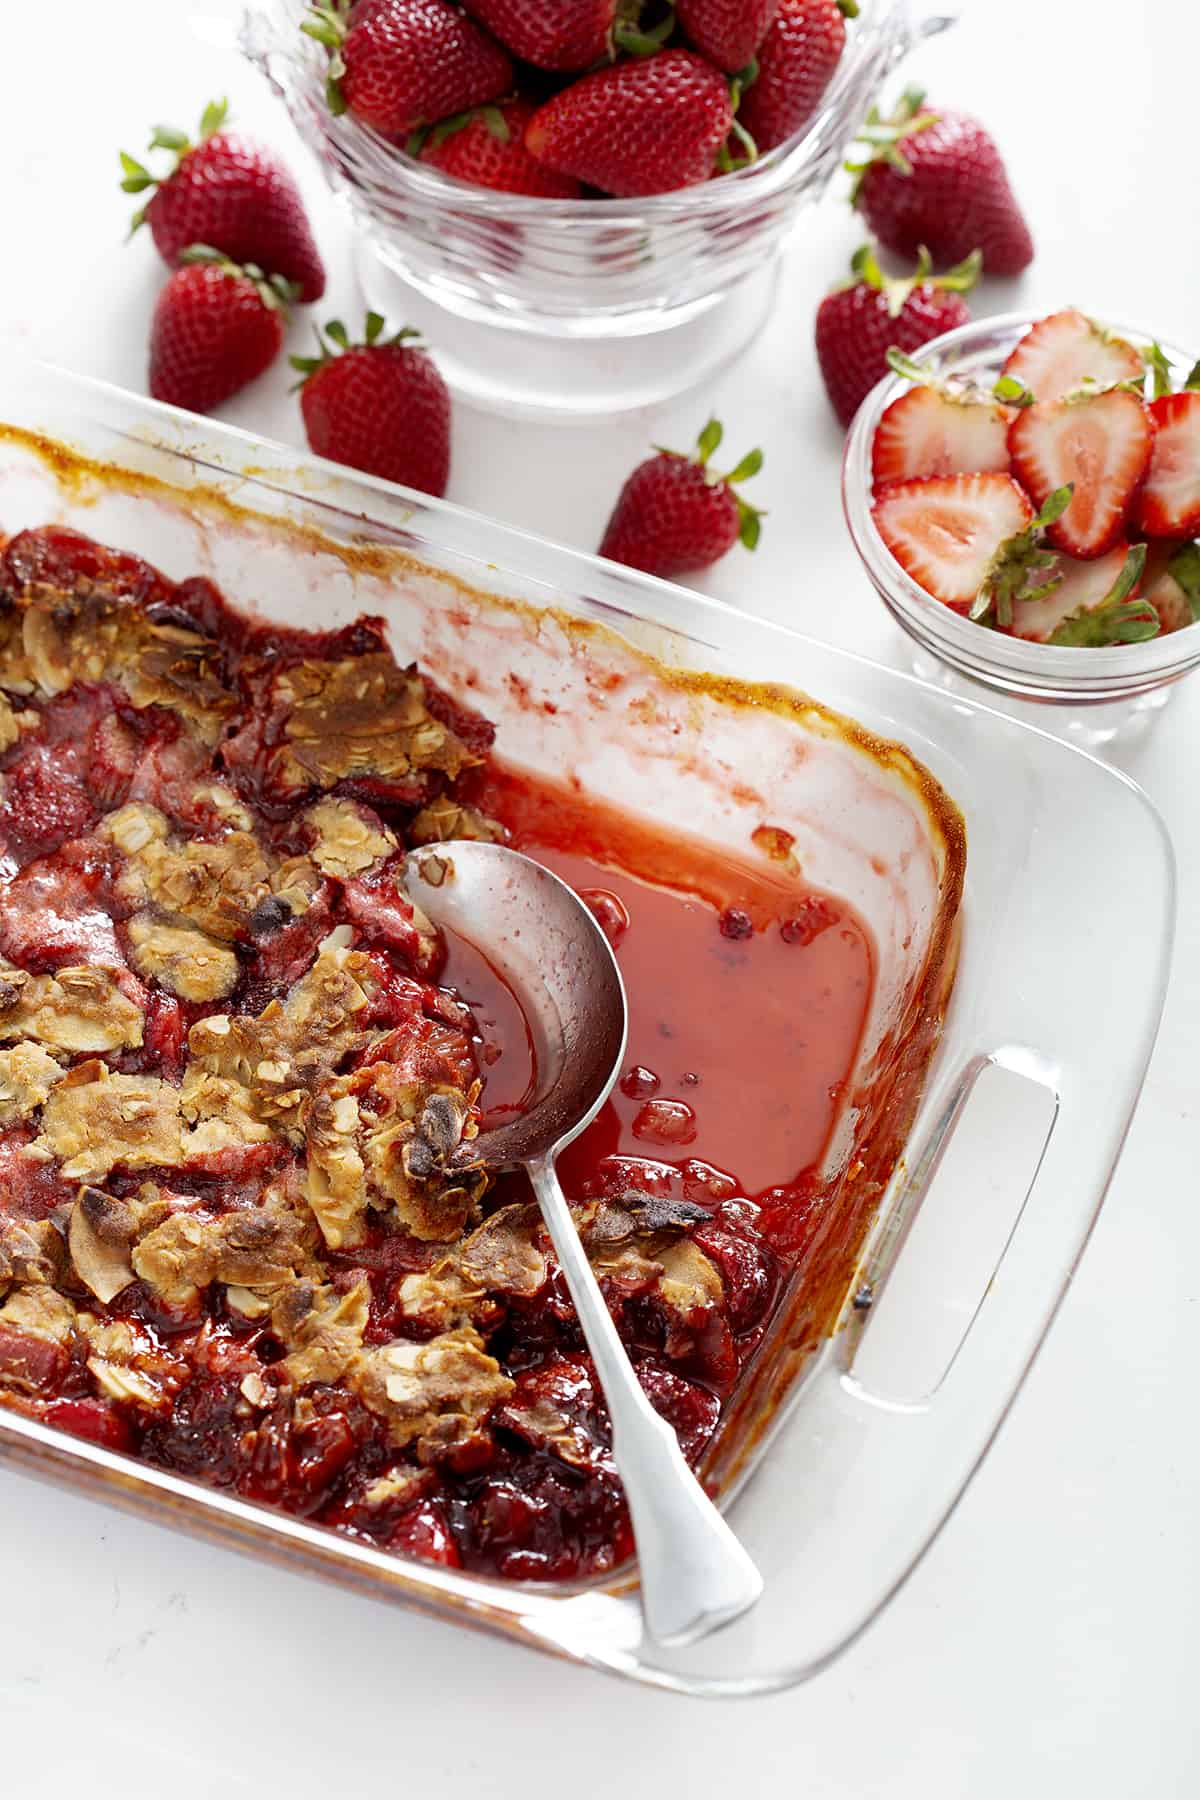 glass pan of strawberry rhubarb crumble with strawberries and serving spoon